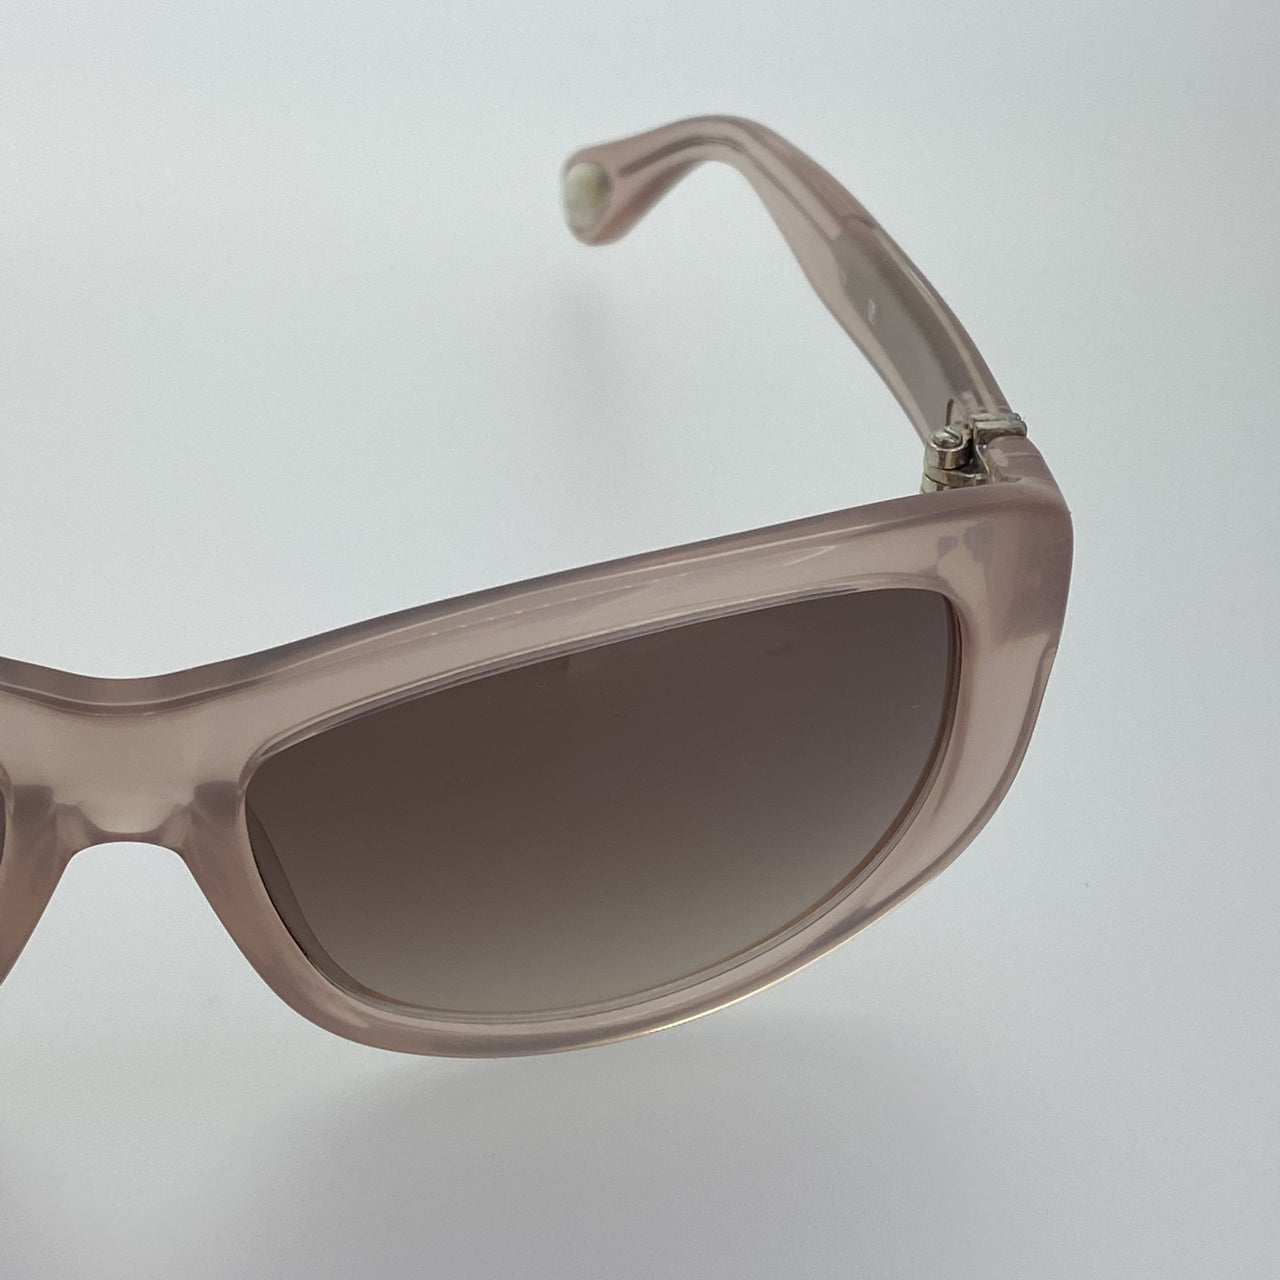 Ann Demeulemeester Sunglasses Cat Eye Blush Pink 925 Silver with Brown Lenses AD29C5SUN - Watches & Crystals